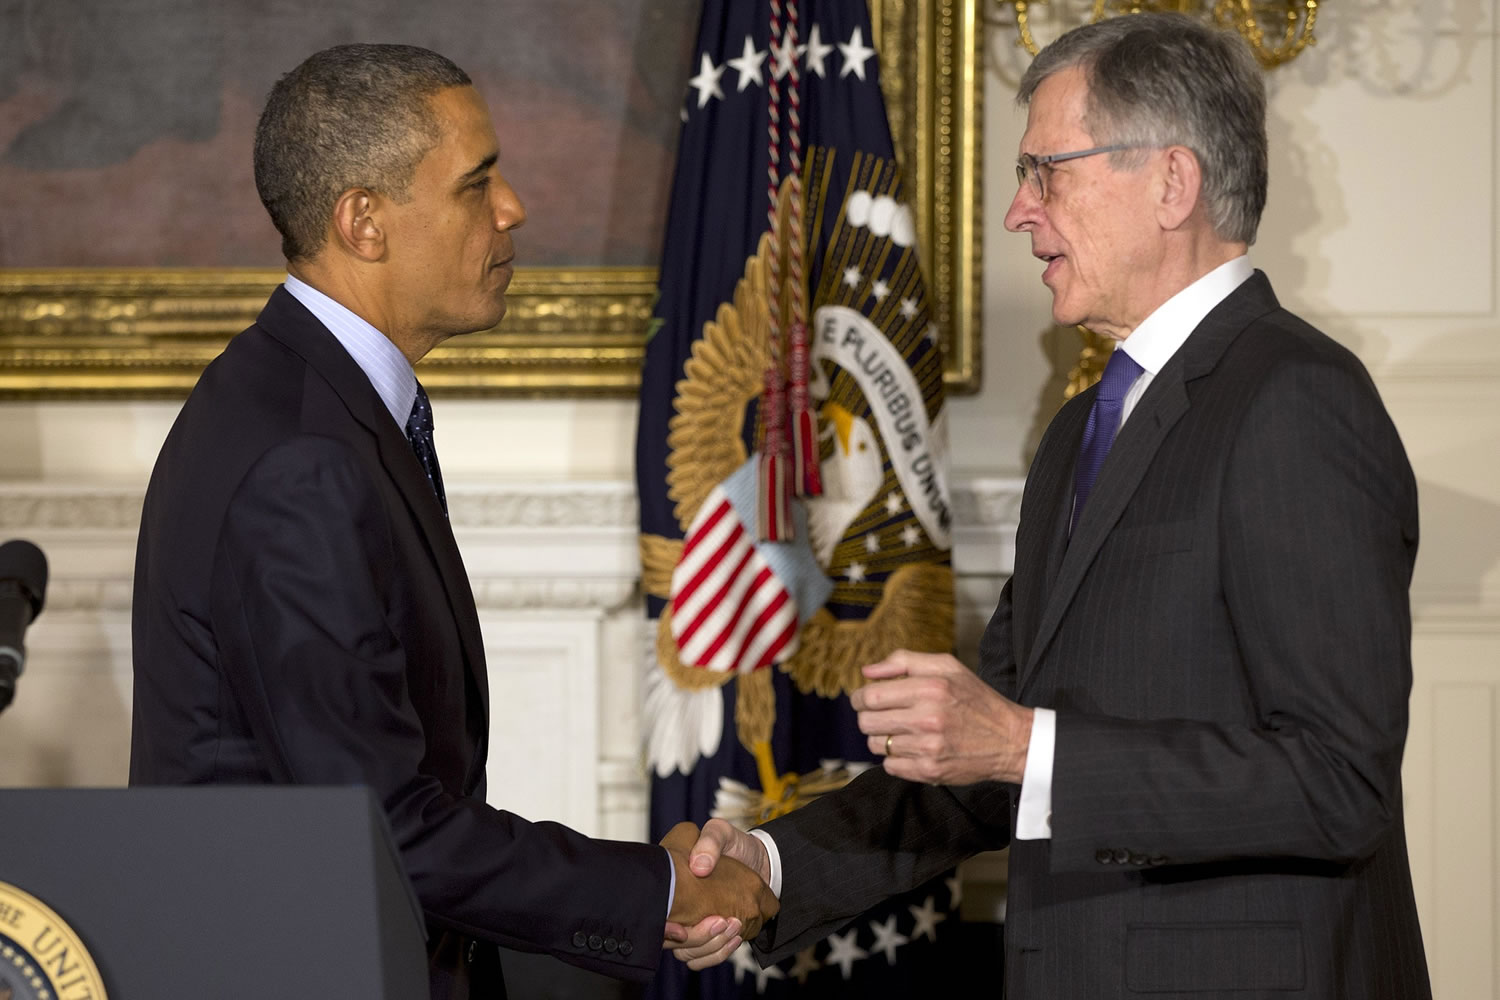 President Barack Obama shakes hands with then nominee for Federal Communications Commission, Tom Wheeler, in the State Dining Room of the White House in Washington.